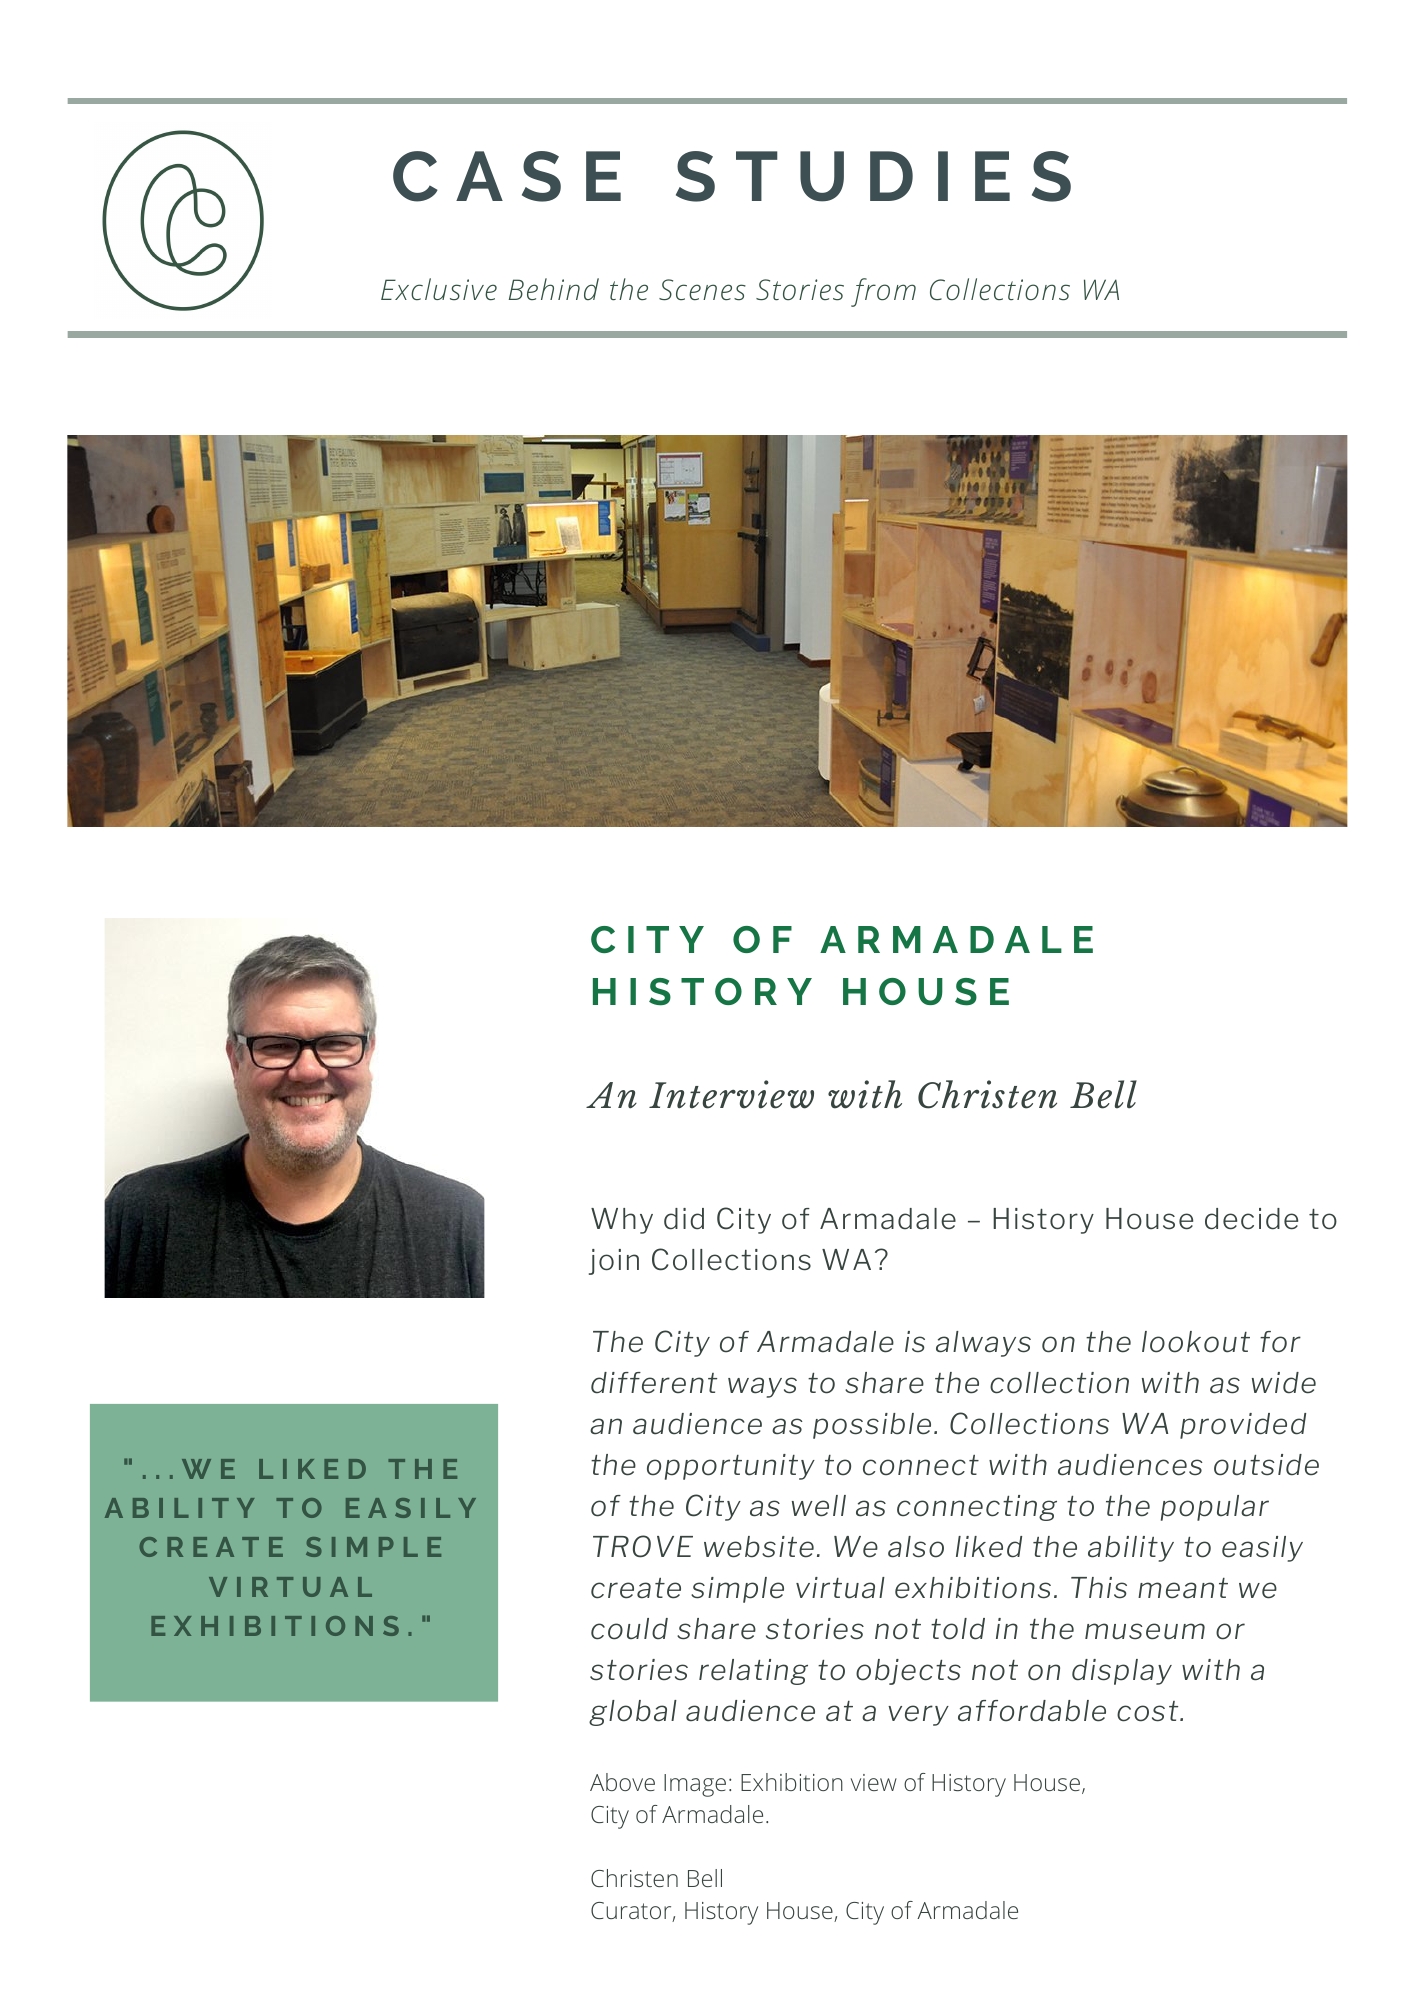 City of Armadale - History House Collections WA Case Study